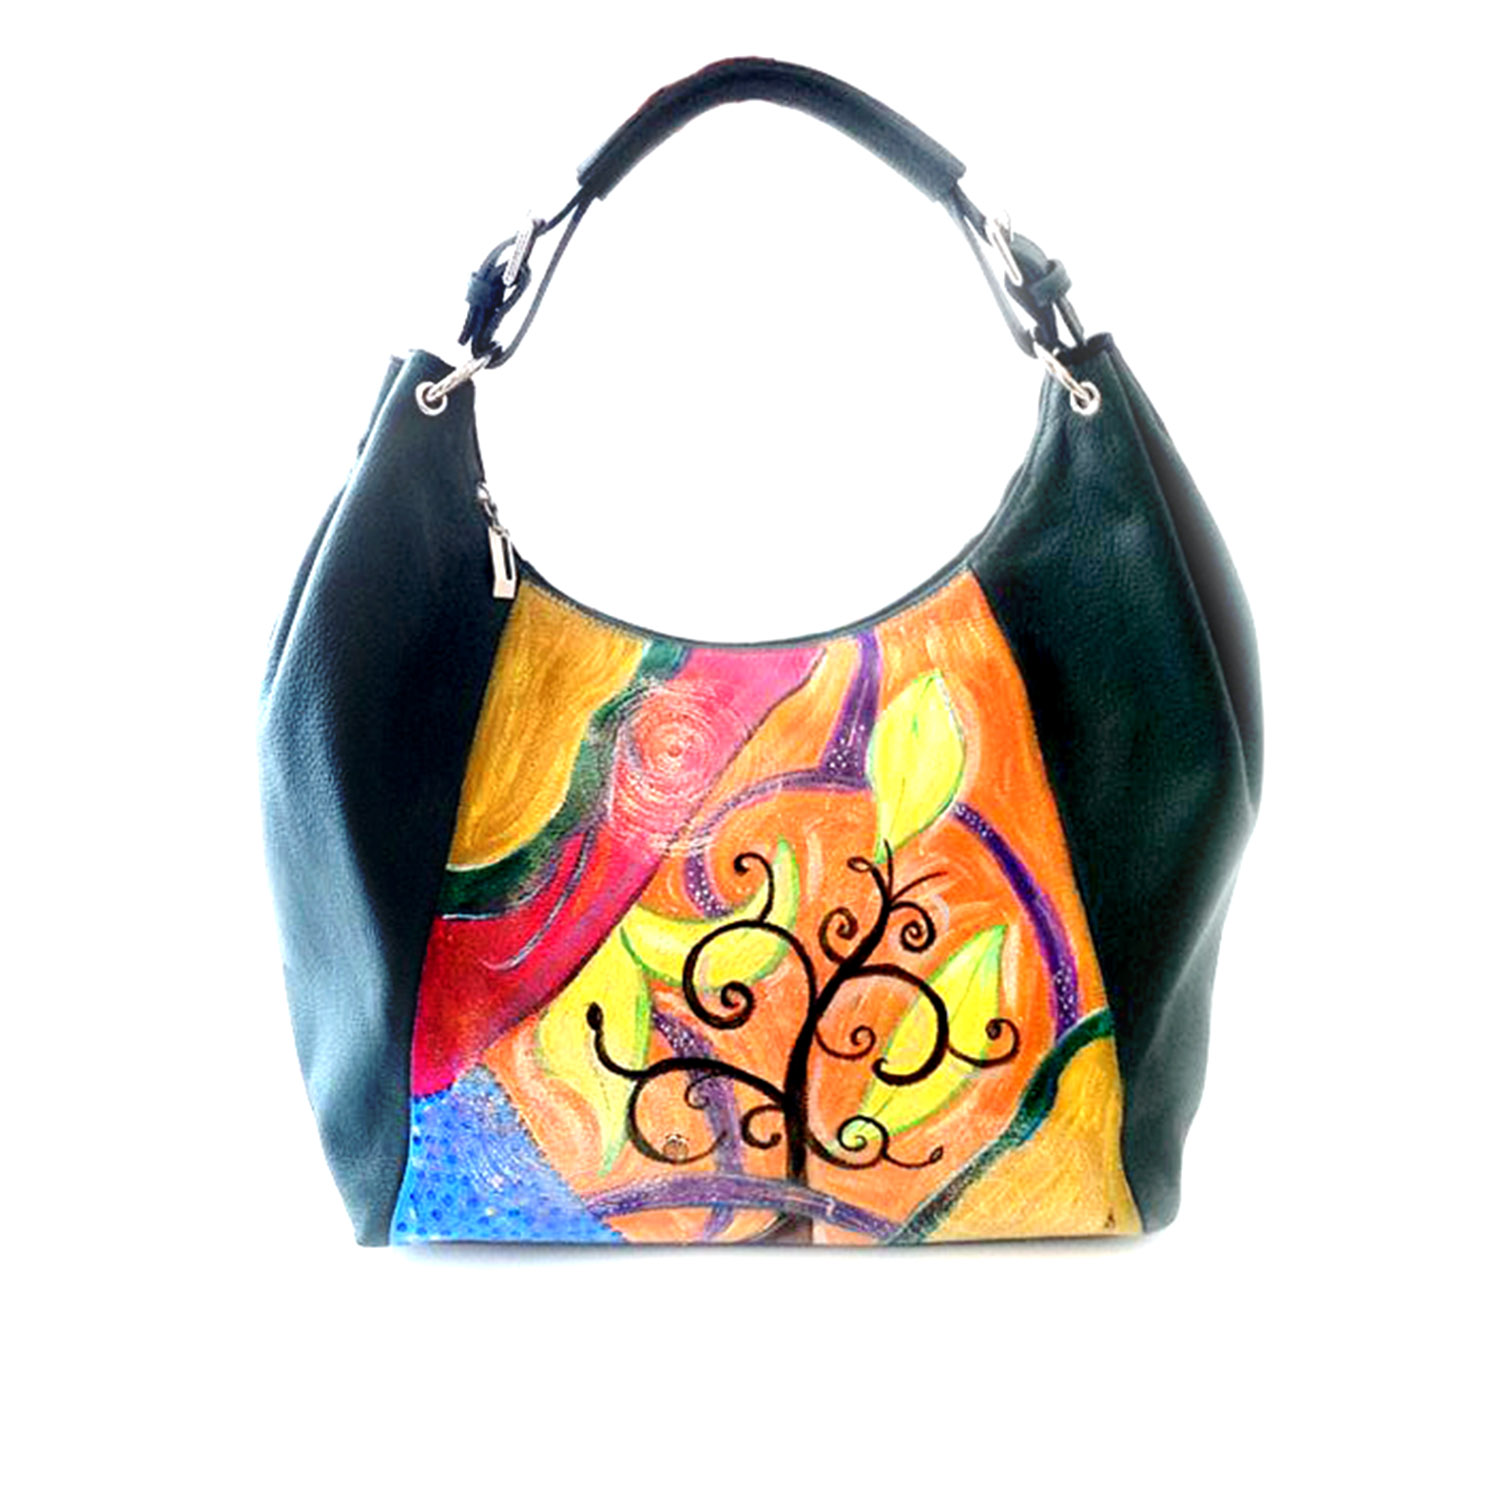 Hand painted bag - The tree of dreams